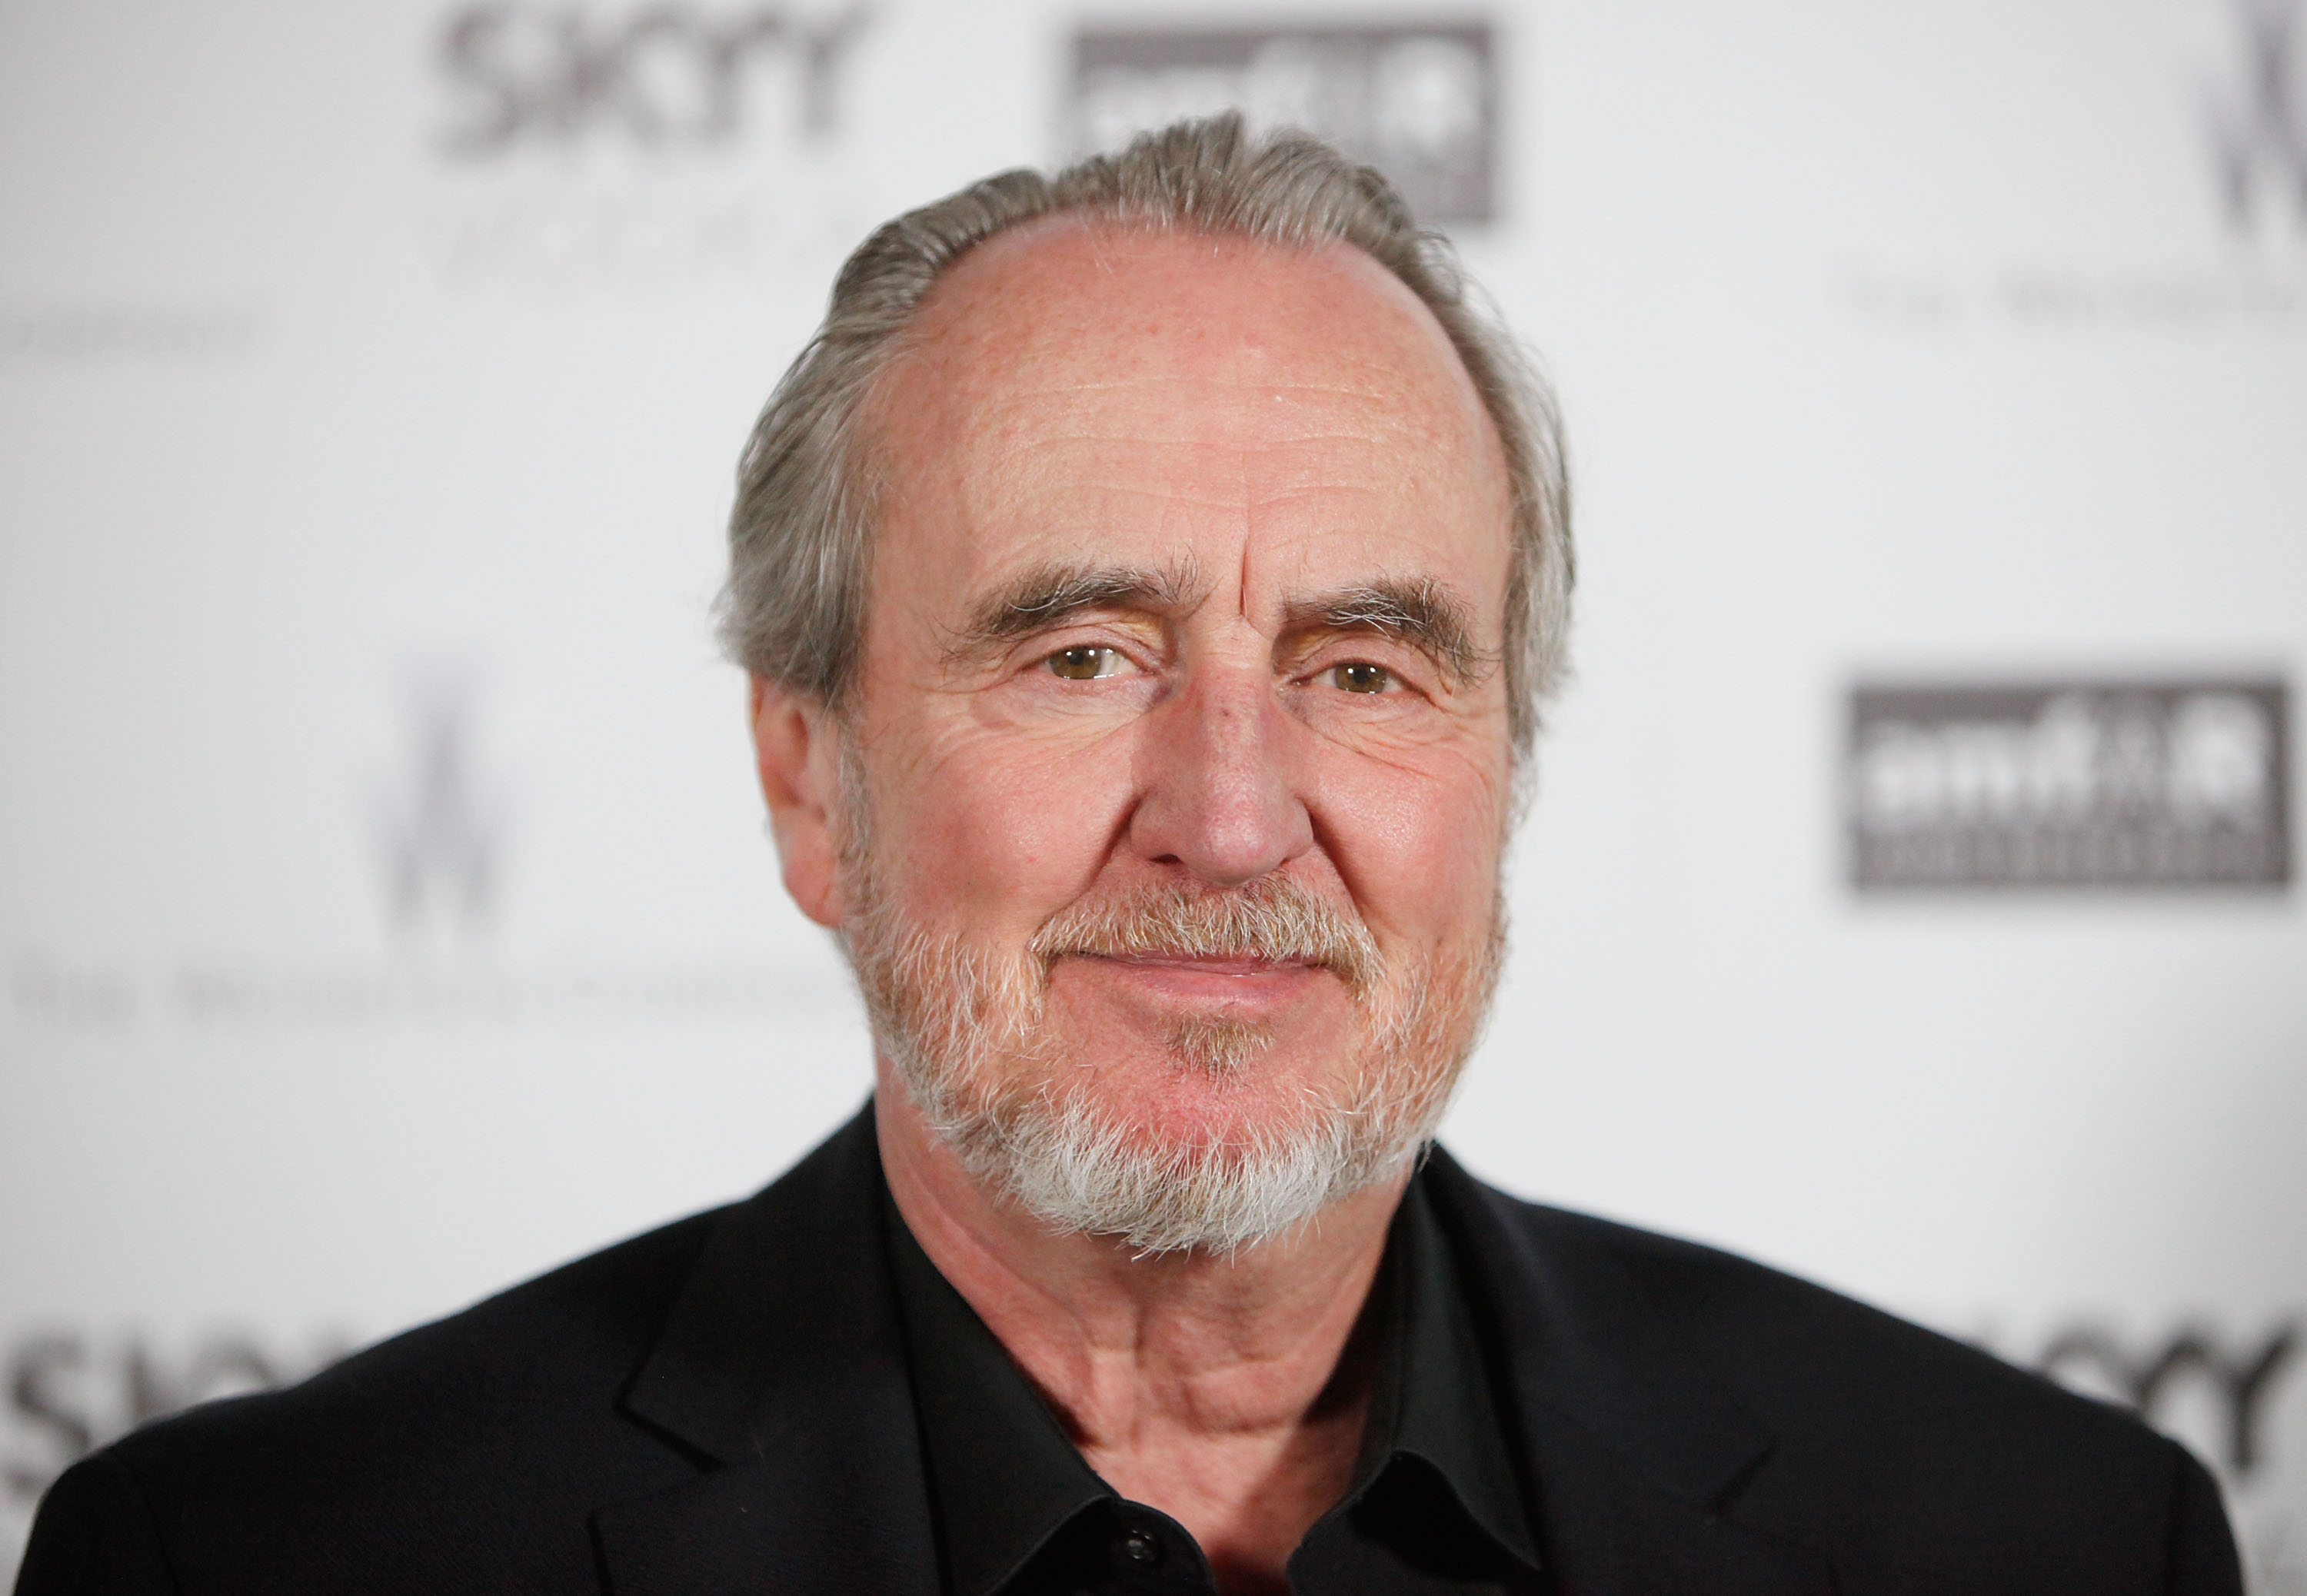 Wes Craven arrives at The Weinstein Company and Dimension Films AFM cocktail party held at Hotel Shangri-La on November 7, 2010 in Santa Monica, California (Michael Tran—FilmMagic/Getty Images)